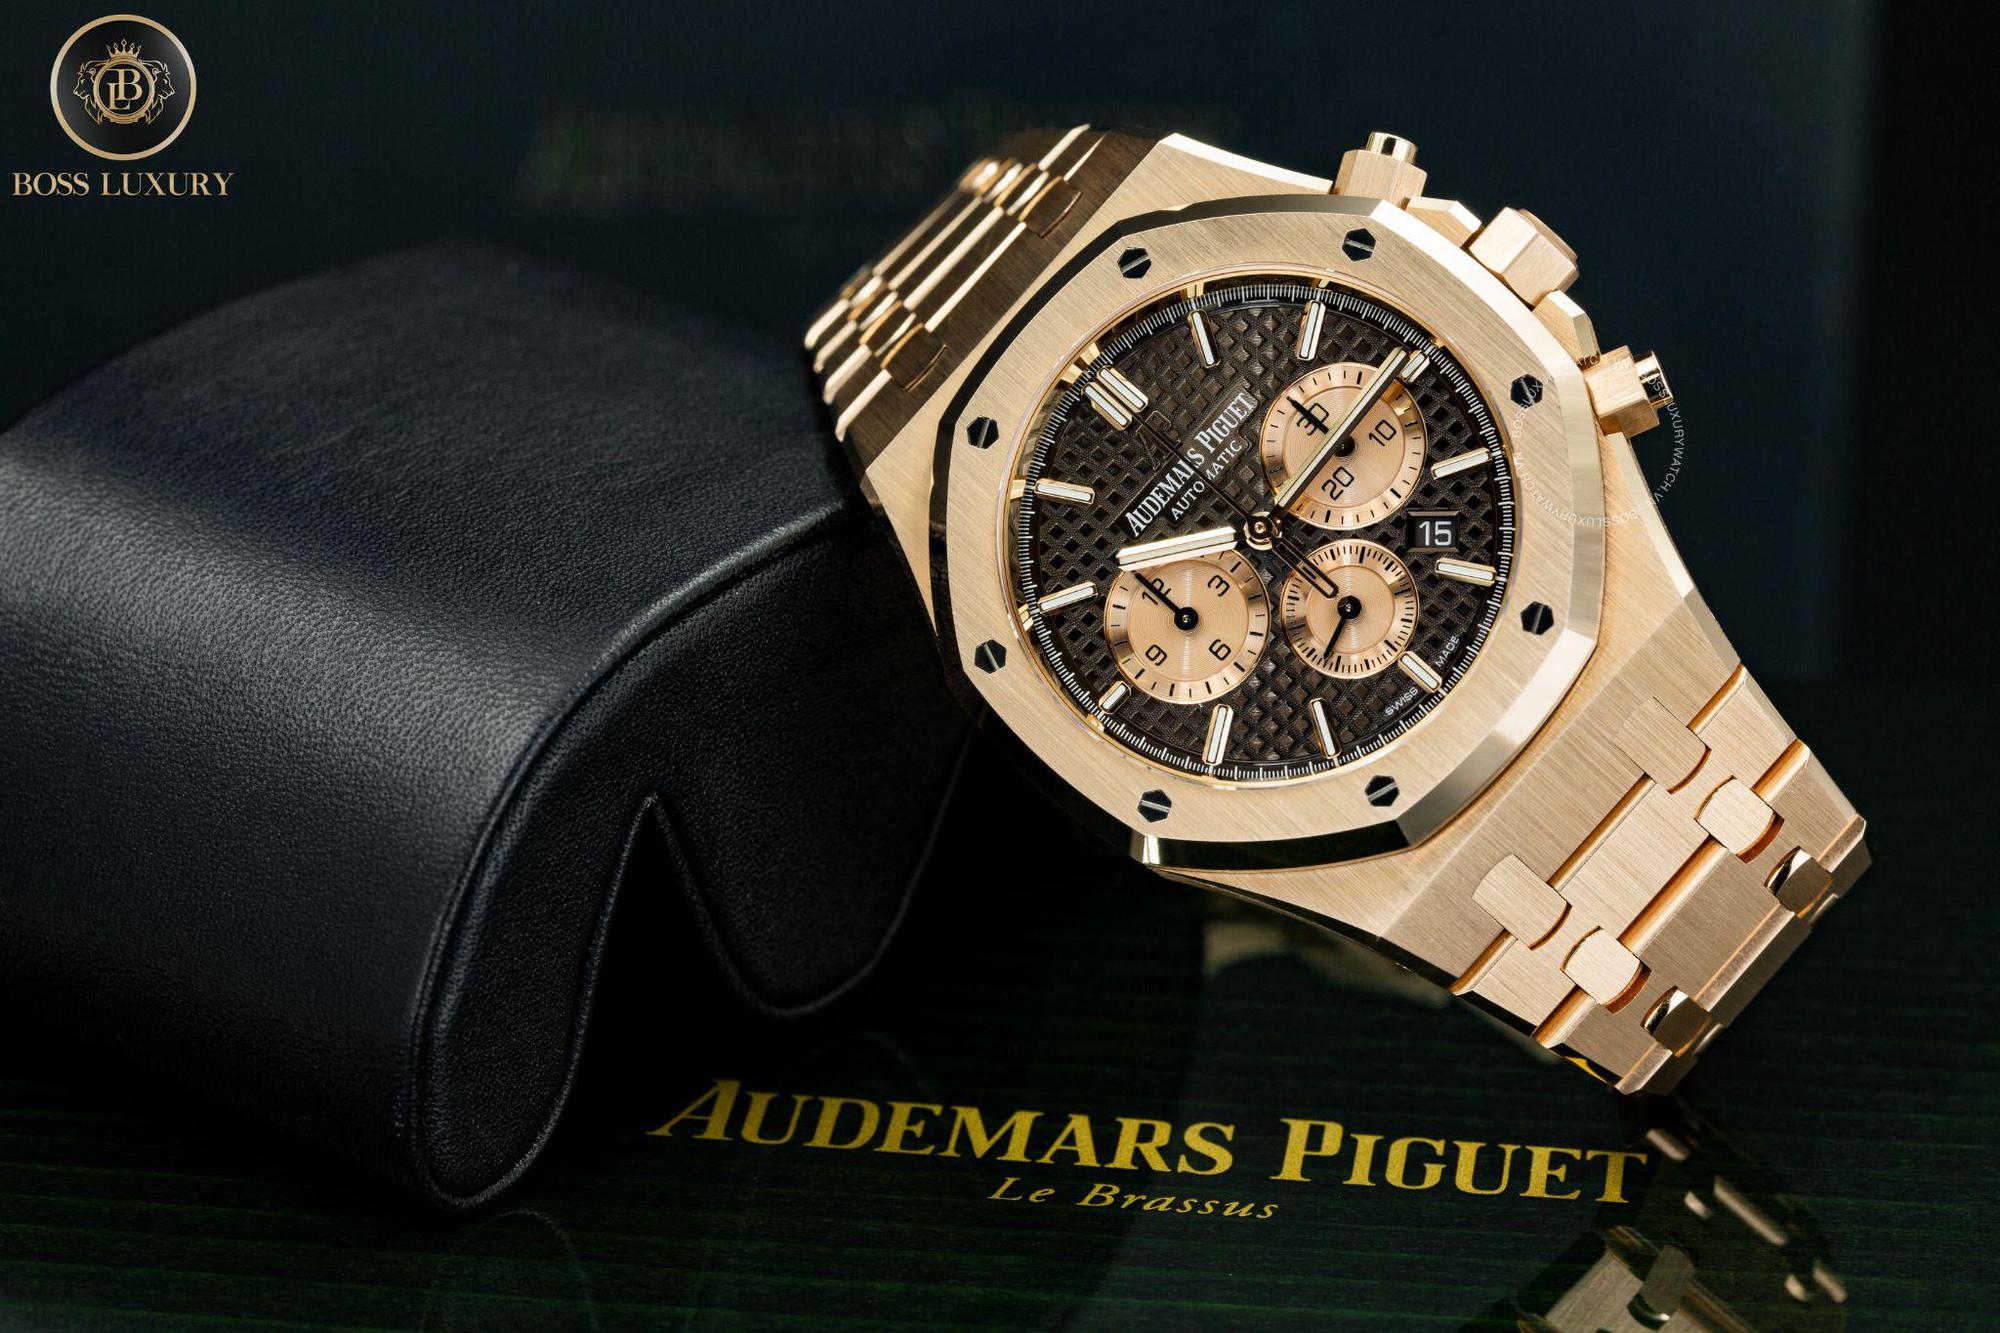 The Audemars Piguet Royal Oak watch models gentlemen must definitely add to the collection according to Boss Luxury - Photo 1.